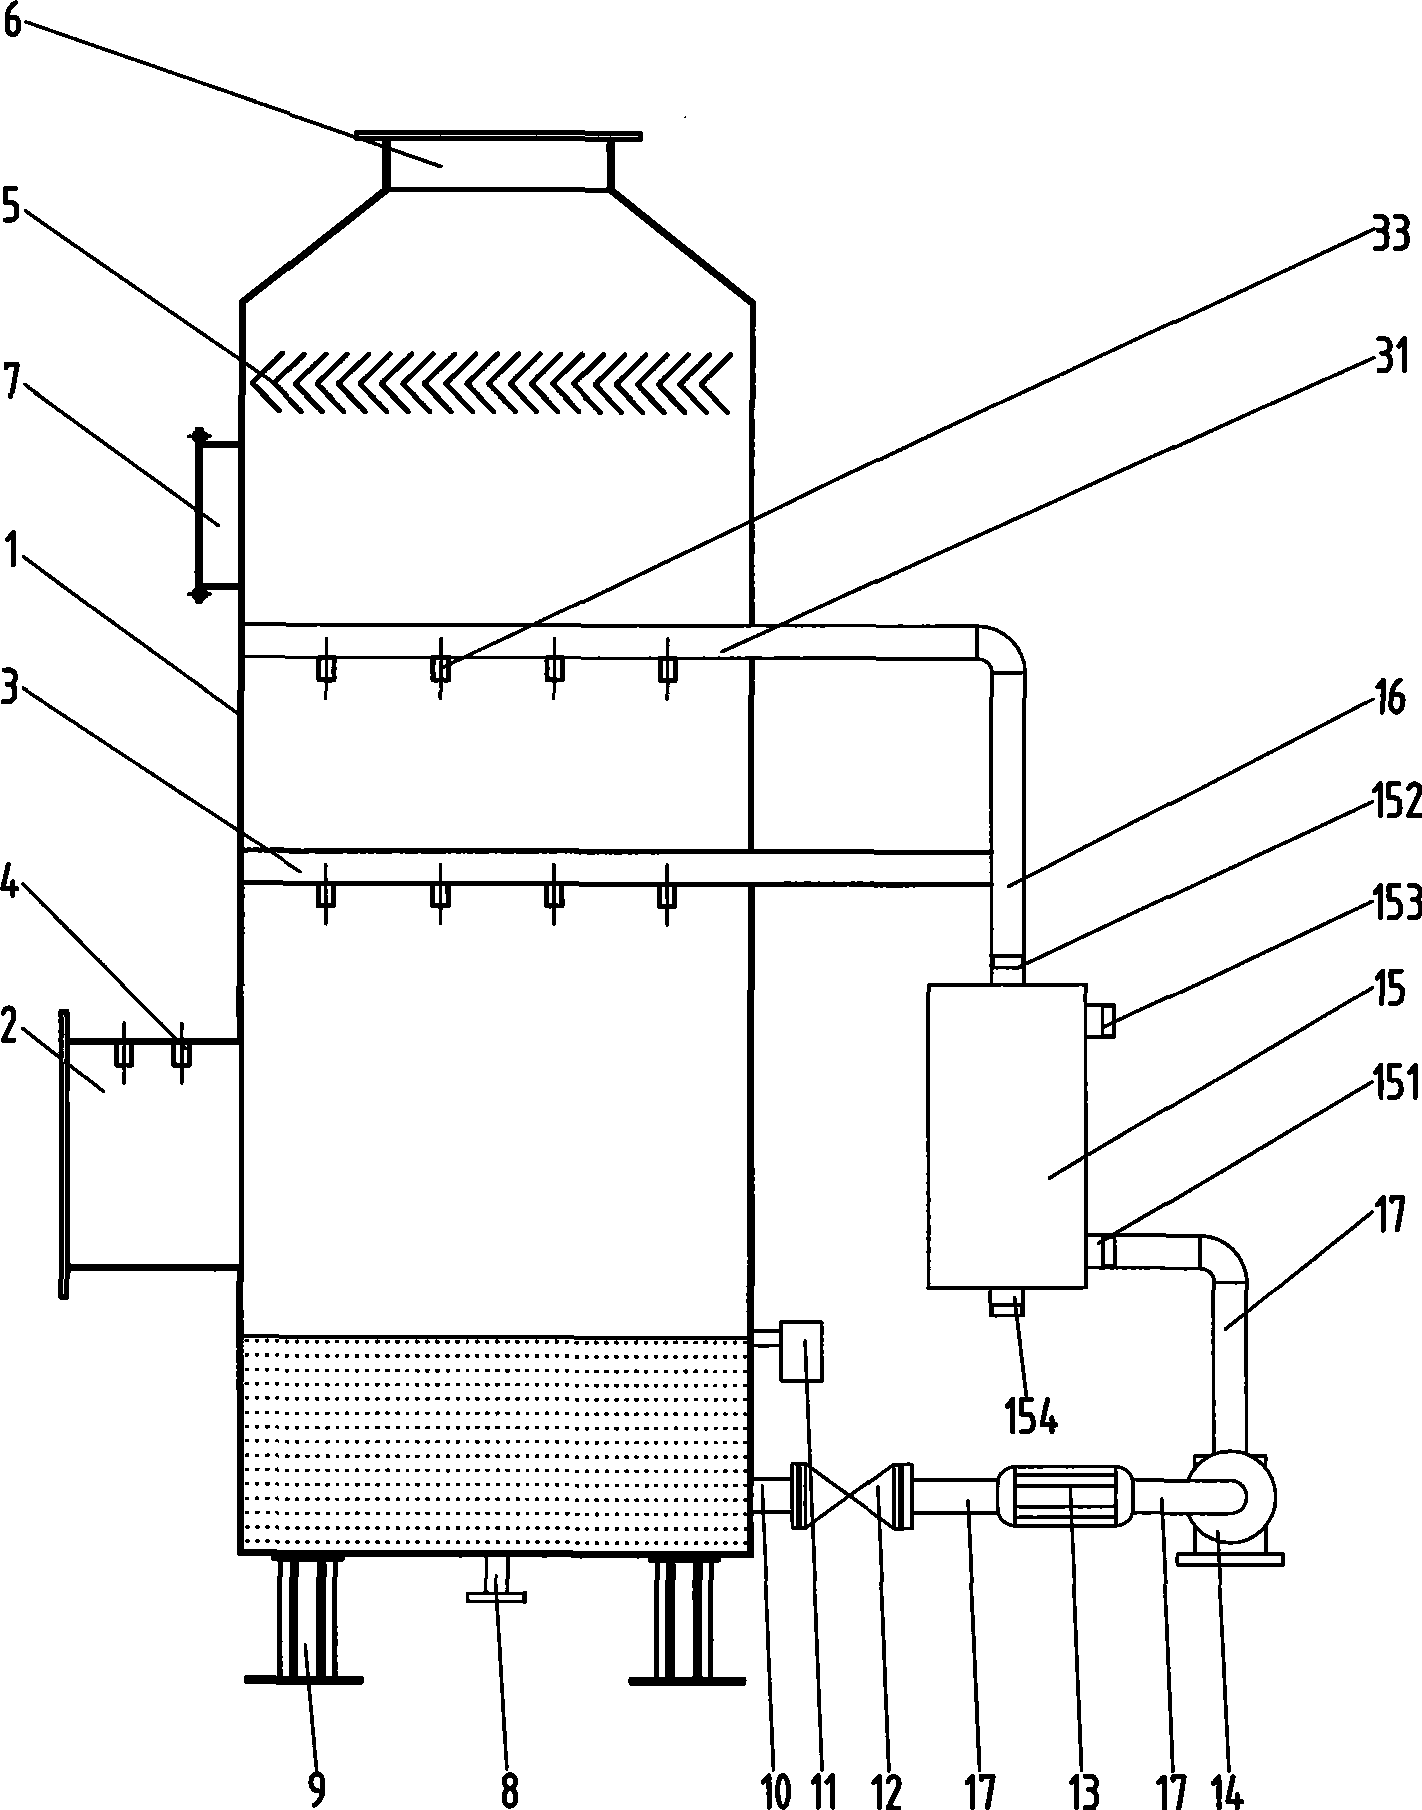 Flue gas waste heat recovery method and system for oil and gas boiler